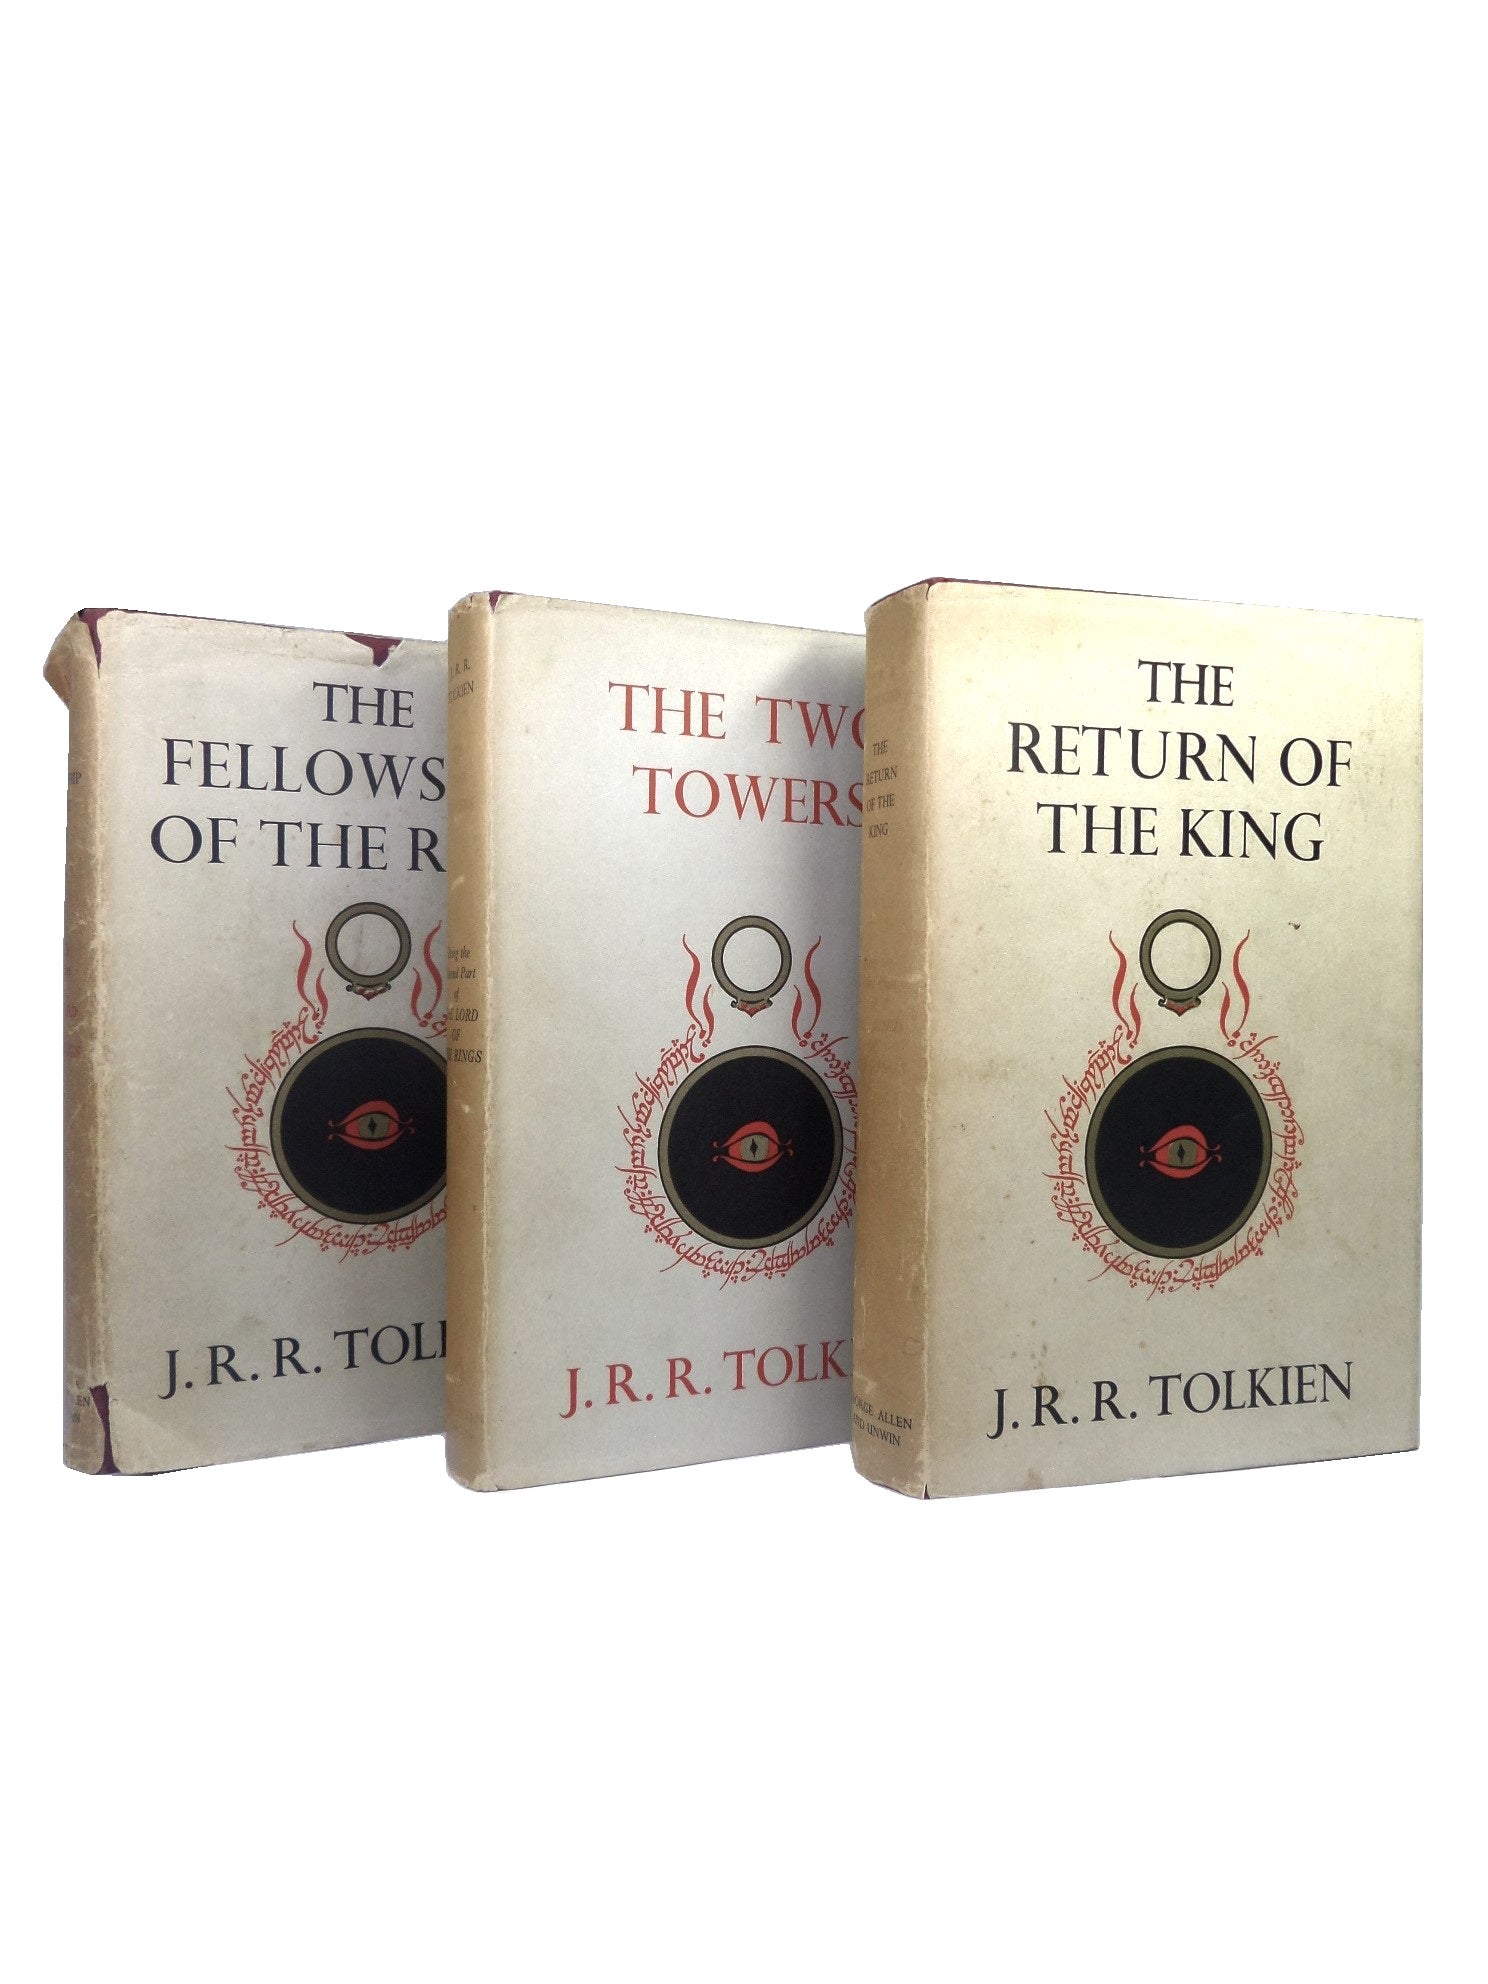 THE LORD OF THE RINGS BY J.R.R. TOLKIEN 1961 FIRST EDITION SET 10TH, 8TH, 7TH IMPRESSIONS